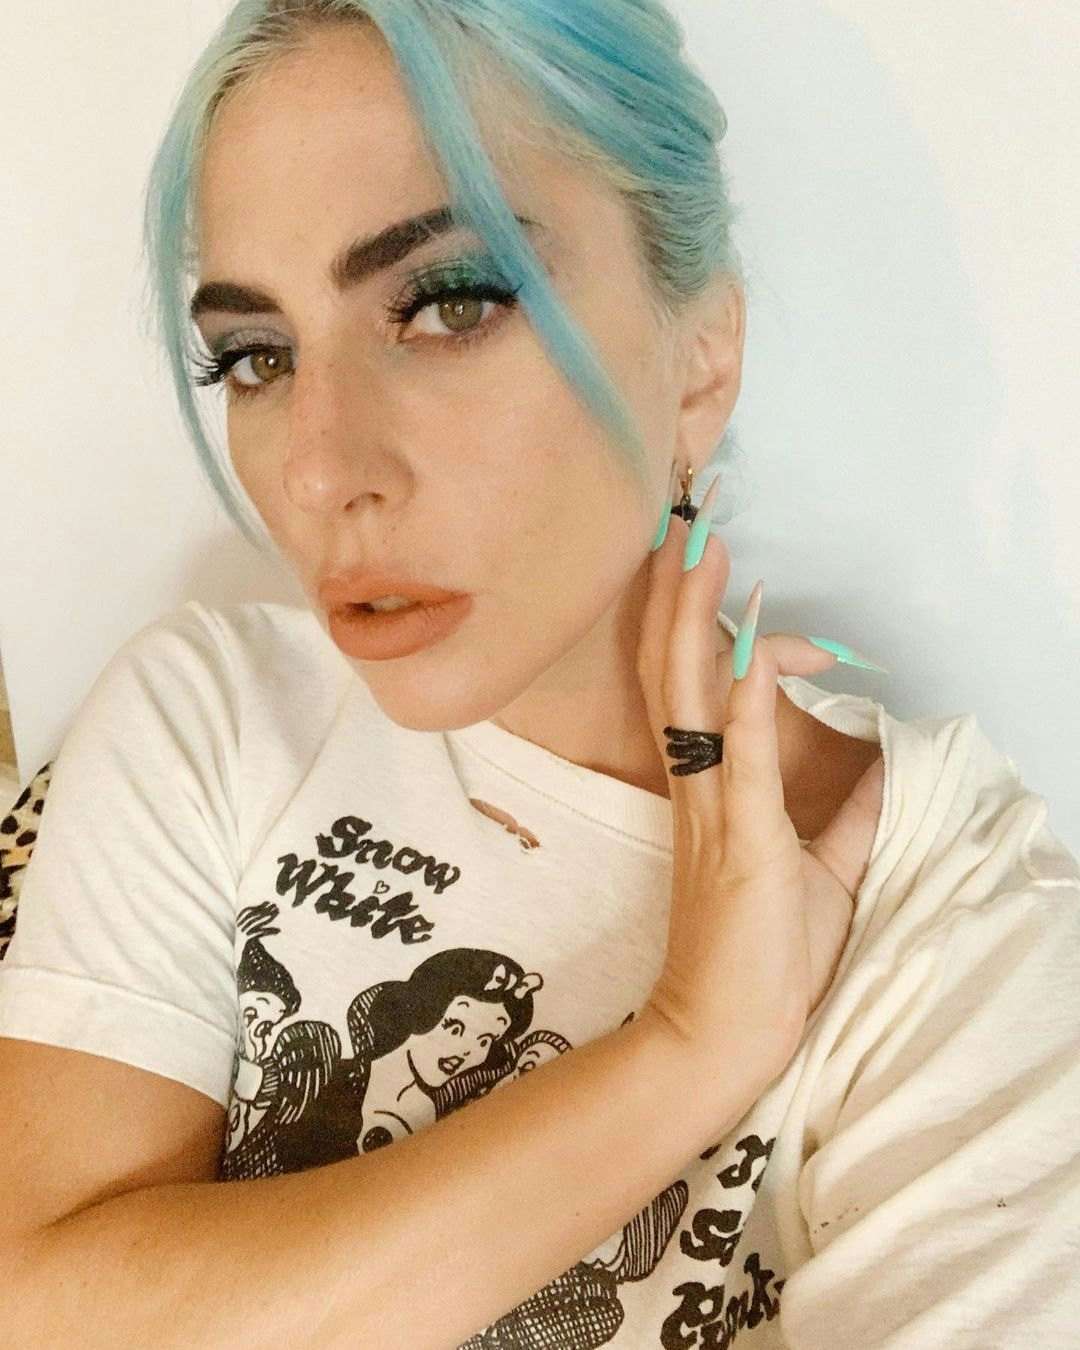 Why Lady Gaga Doesnt Wear Wigs Anymore According to Her Hairstylist  Lady  gaga real hair Silver blonde hair Permanent hair dye